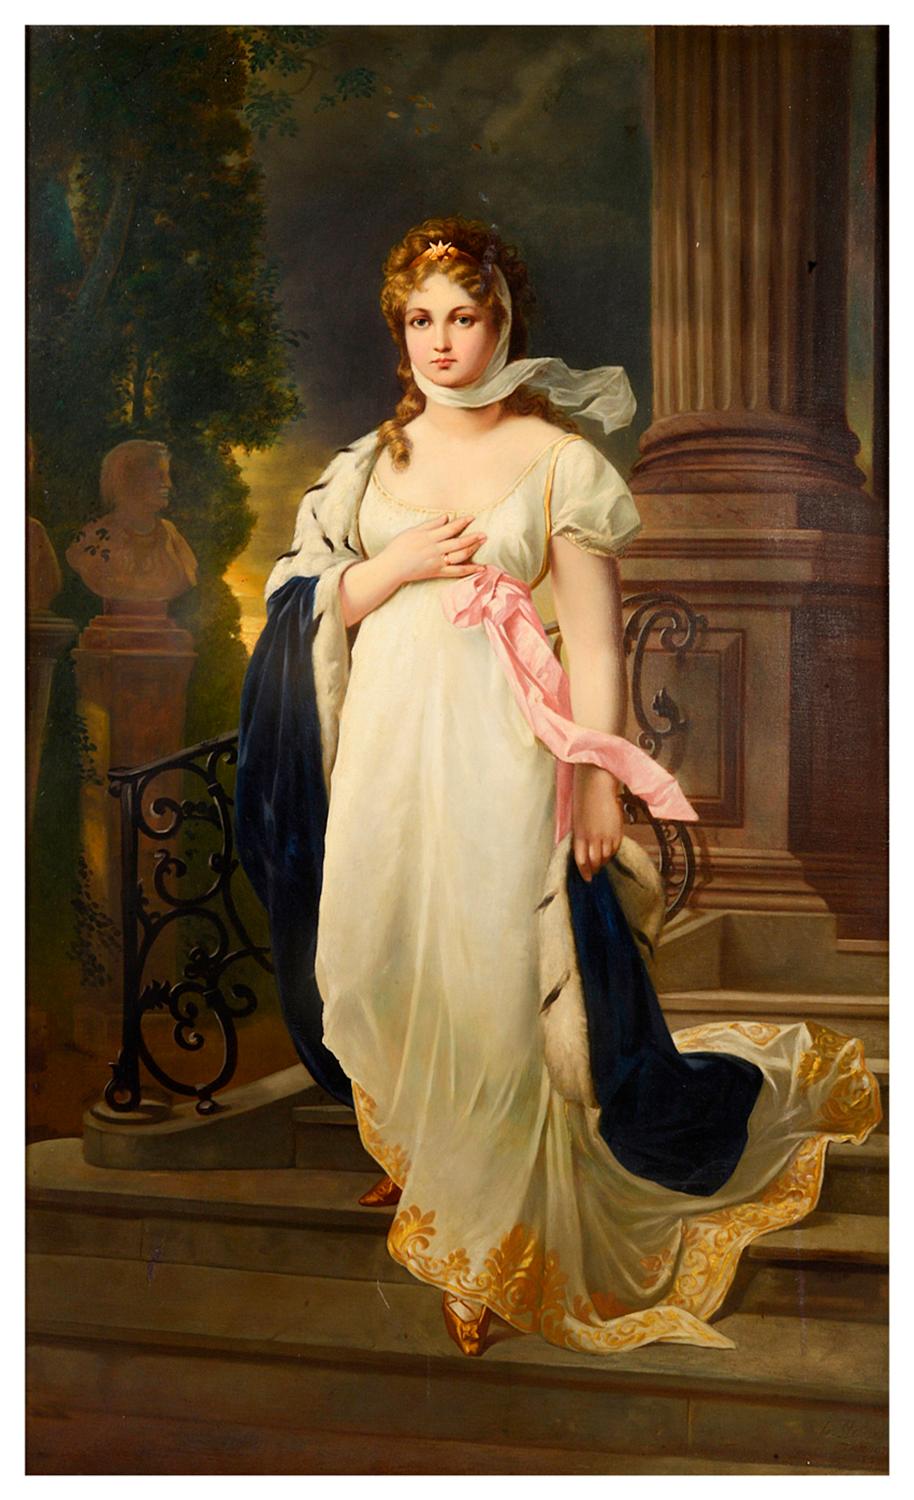 Oil on canvas painting of an extremely famous painting of Louise of Mecklenburg-Strelitz, the celebrated 19th century Prussian Queen. The subject of this portrait is the Duchess Louise of Mecklenburg-Strelitz (1776-1810), the famed Queen consort of